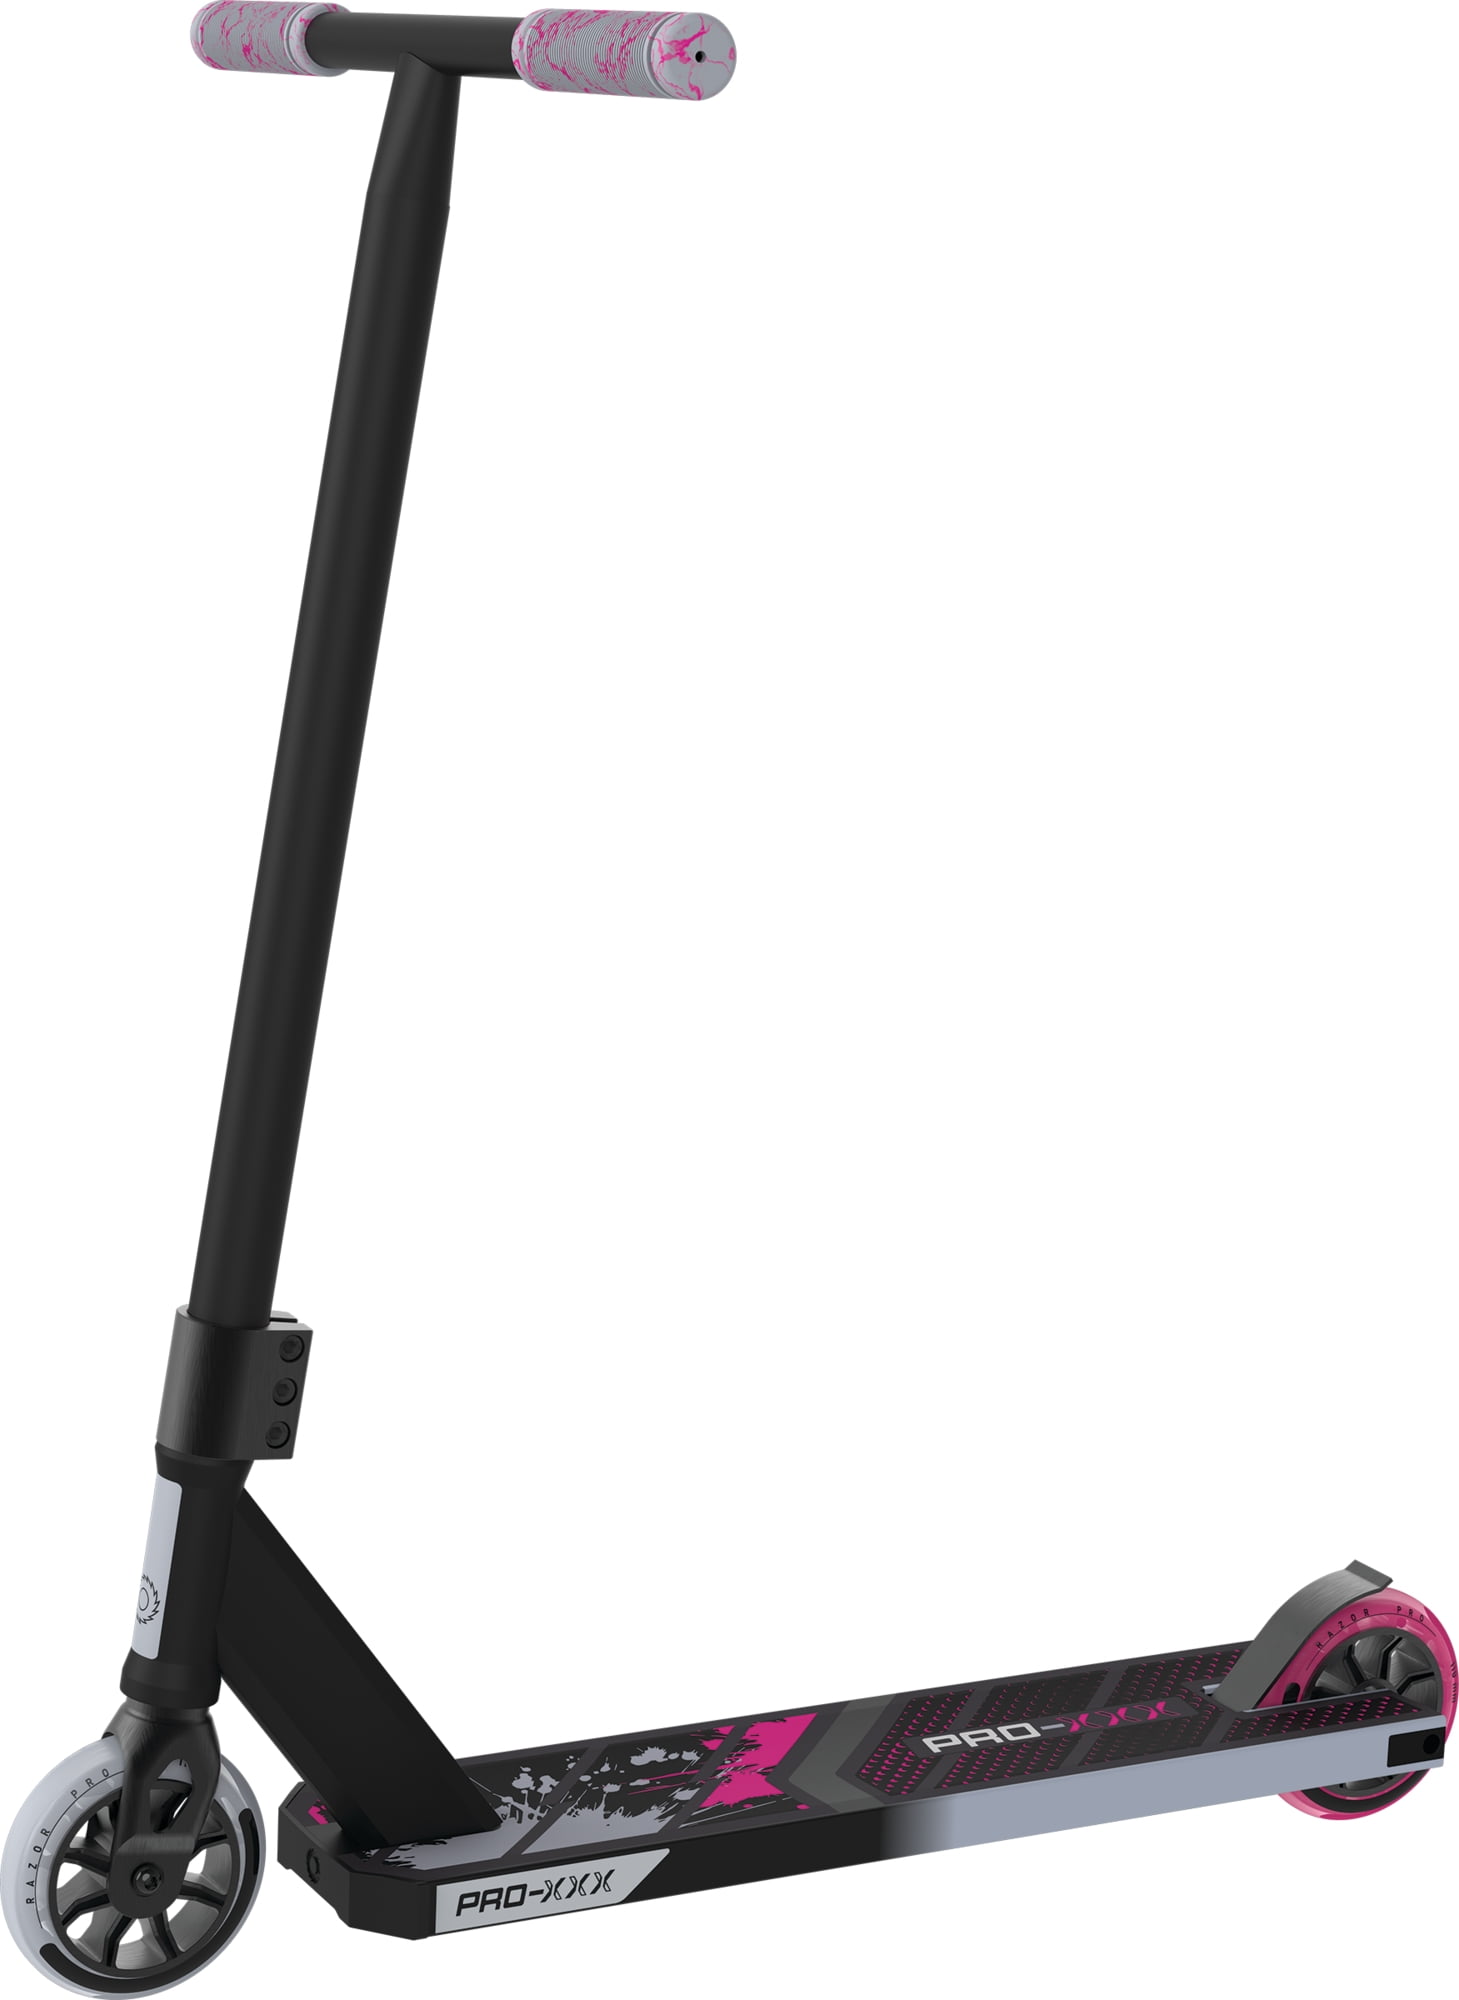 Razor Pro XXX Stunt Kick Scooter for Kids, Teens and Adults. Straight Handlebars, 110 mm High Performance Wheels, Aluminum Deck with Boxed Edges, Customizable Grip Tape